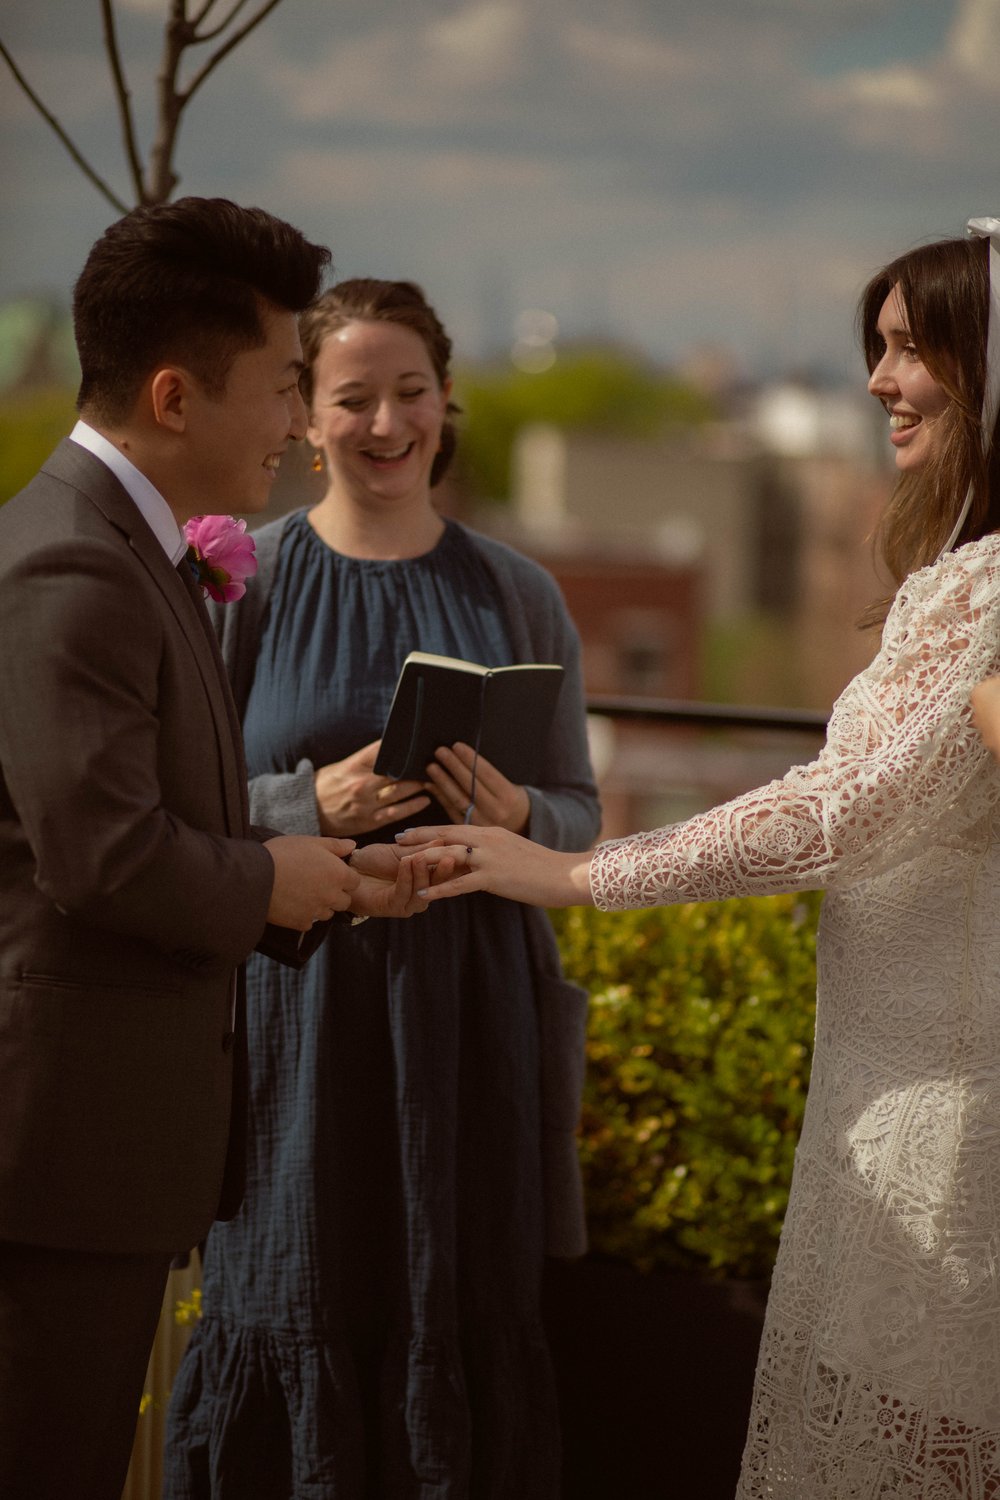 A heartwarming moment captured during the rooftop ceremony in Brooklyn, New York City. Katie and Stan exchange looks filled with genuine love and admiration.